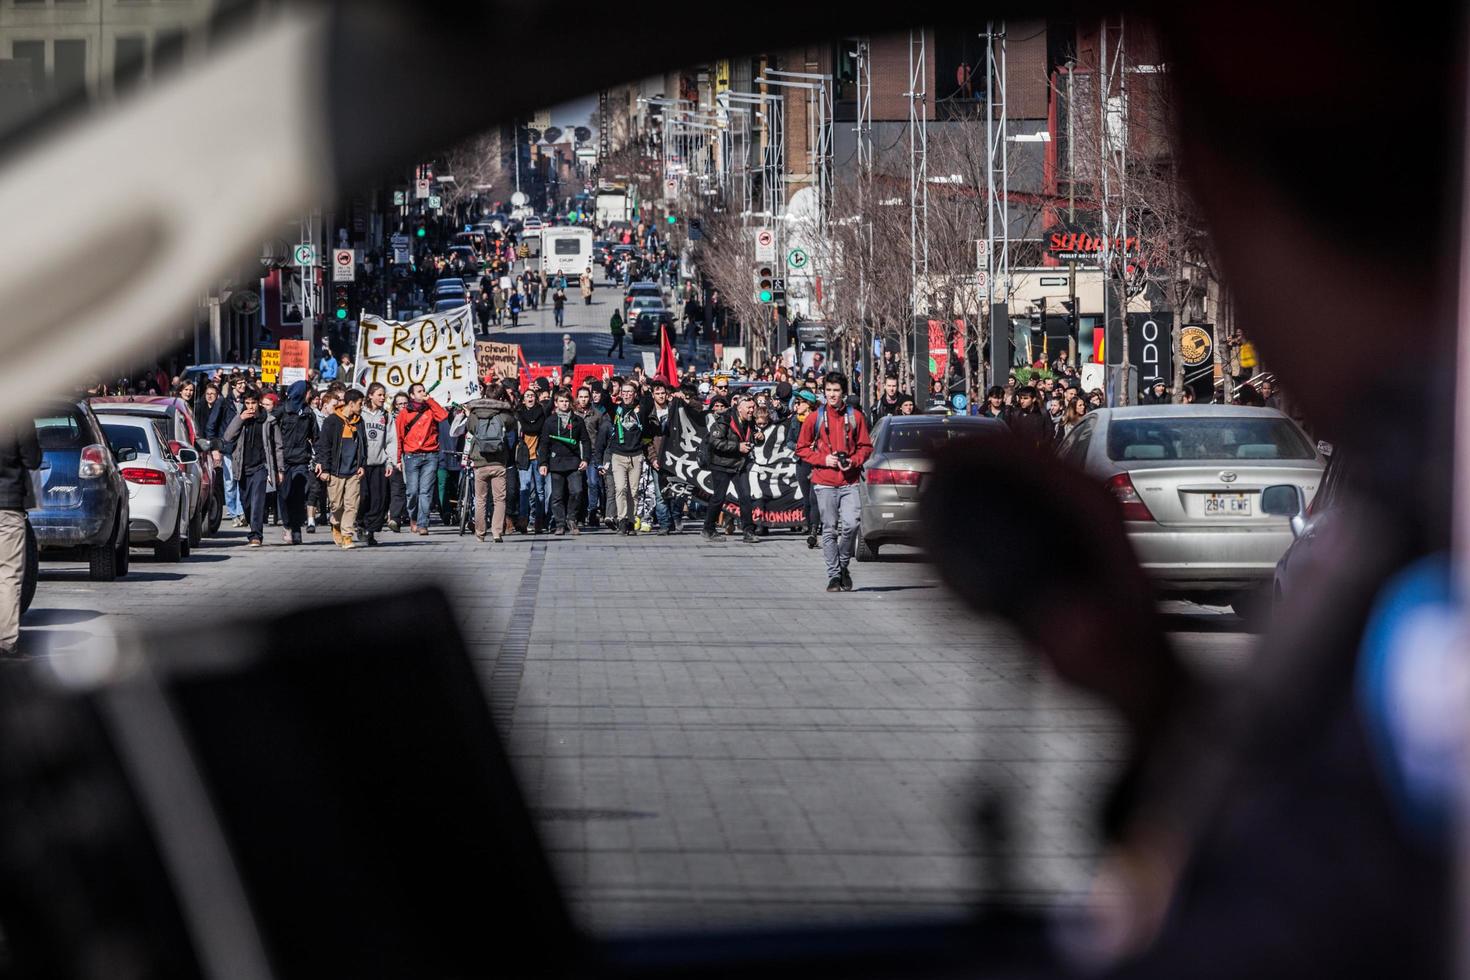 MONTREAL, CANADA APRIL 02 2015 - View of the First line of Protesters walking in the Street Through a Police Car Window photo